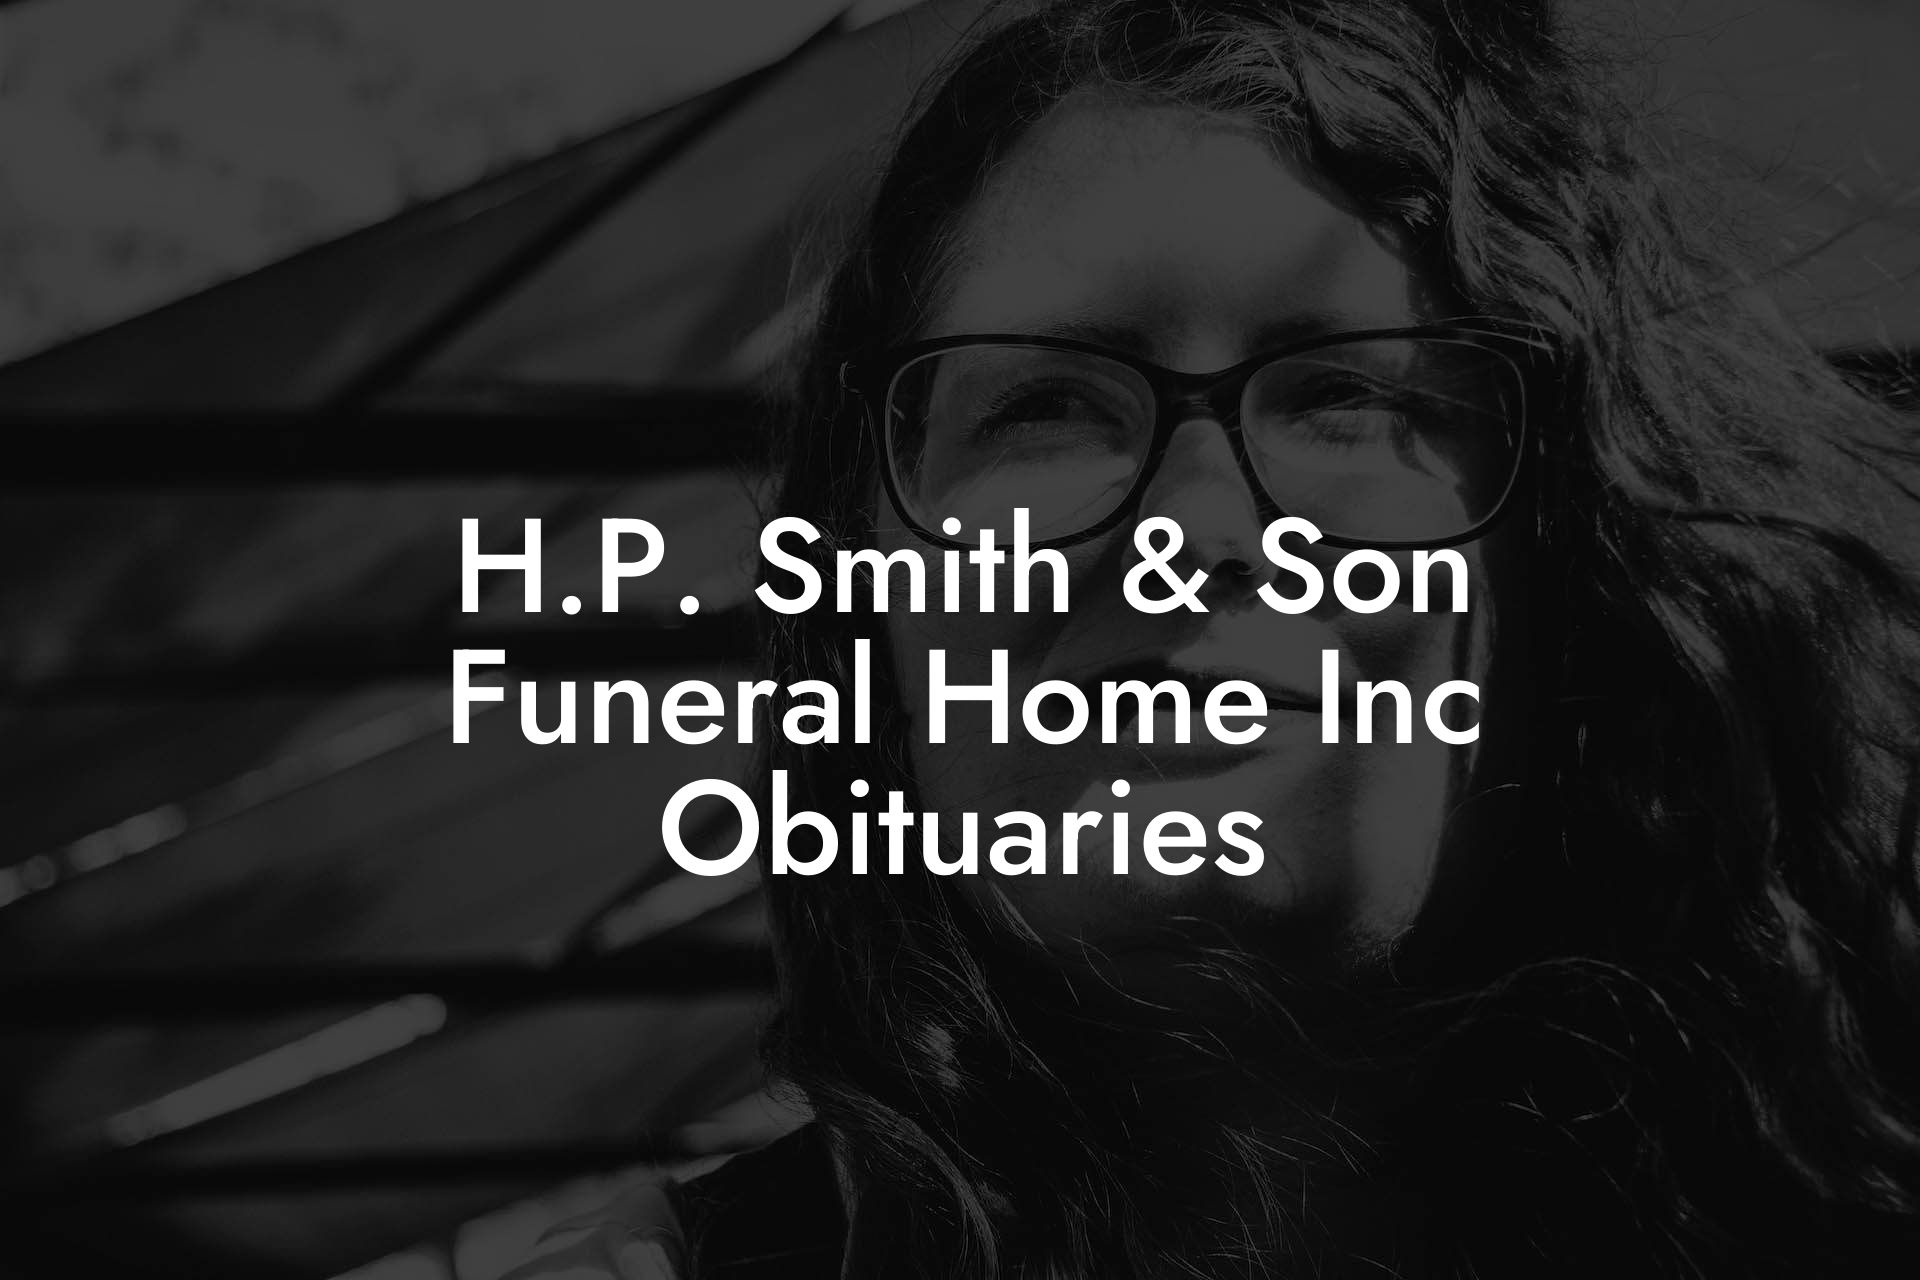 H.P. Smith & Son Funeral Home Inc Obituaries